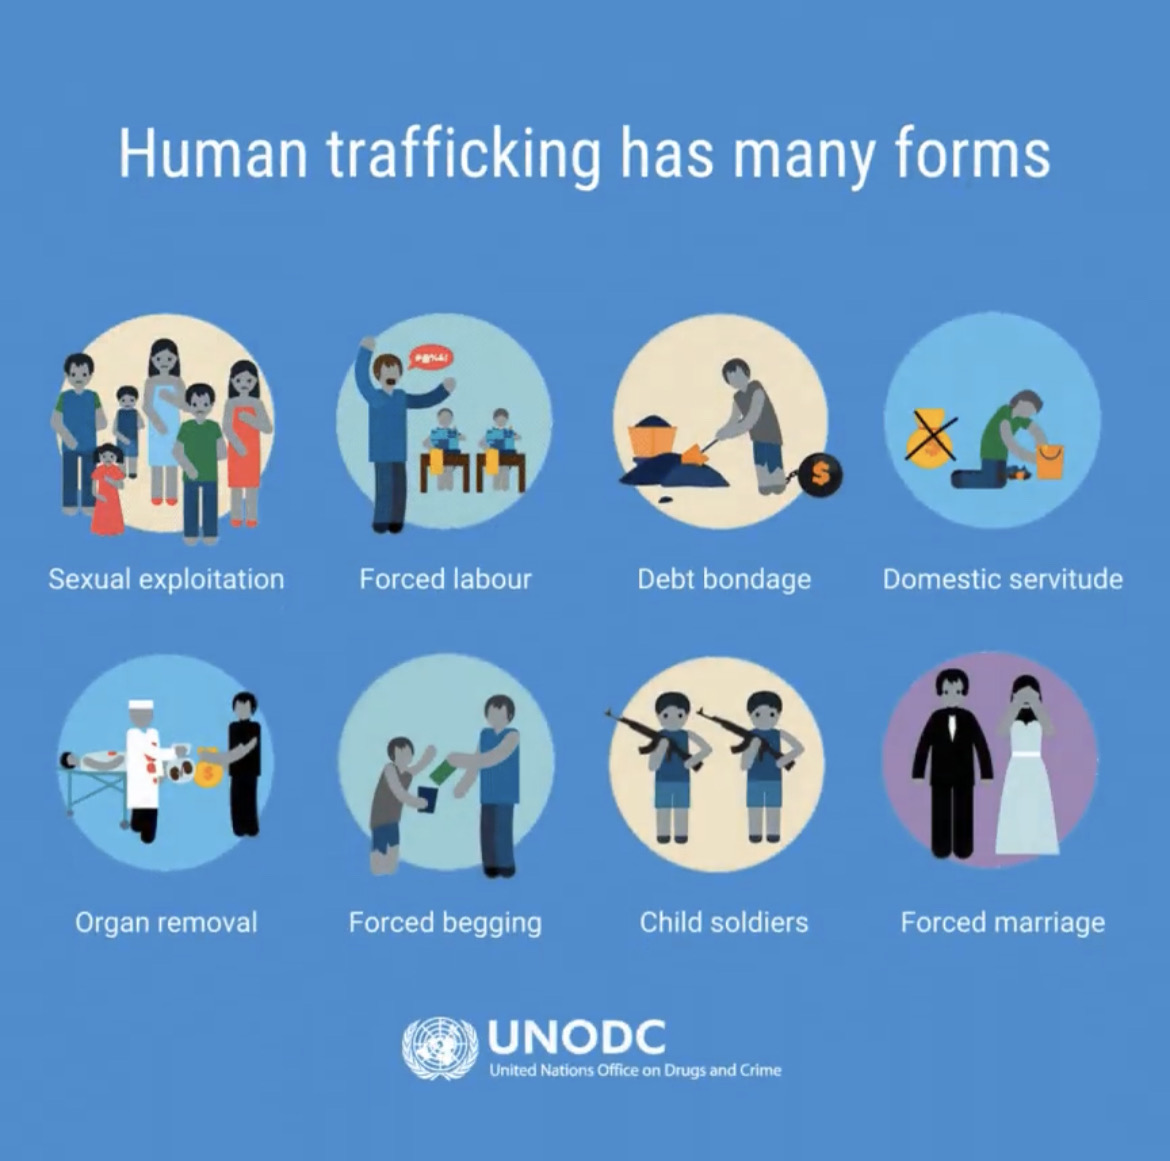 From sexual exploitation & forced marriage to forced labour in construction & agriculture: human trafficking takes many forms. Victims often live in fear of violence & inhumane conditions. Learn more about this crime & UNODC’s work to combat it⤵️ bit.ly/2VaYP7J